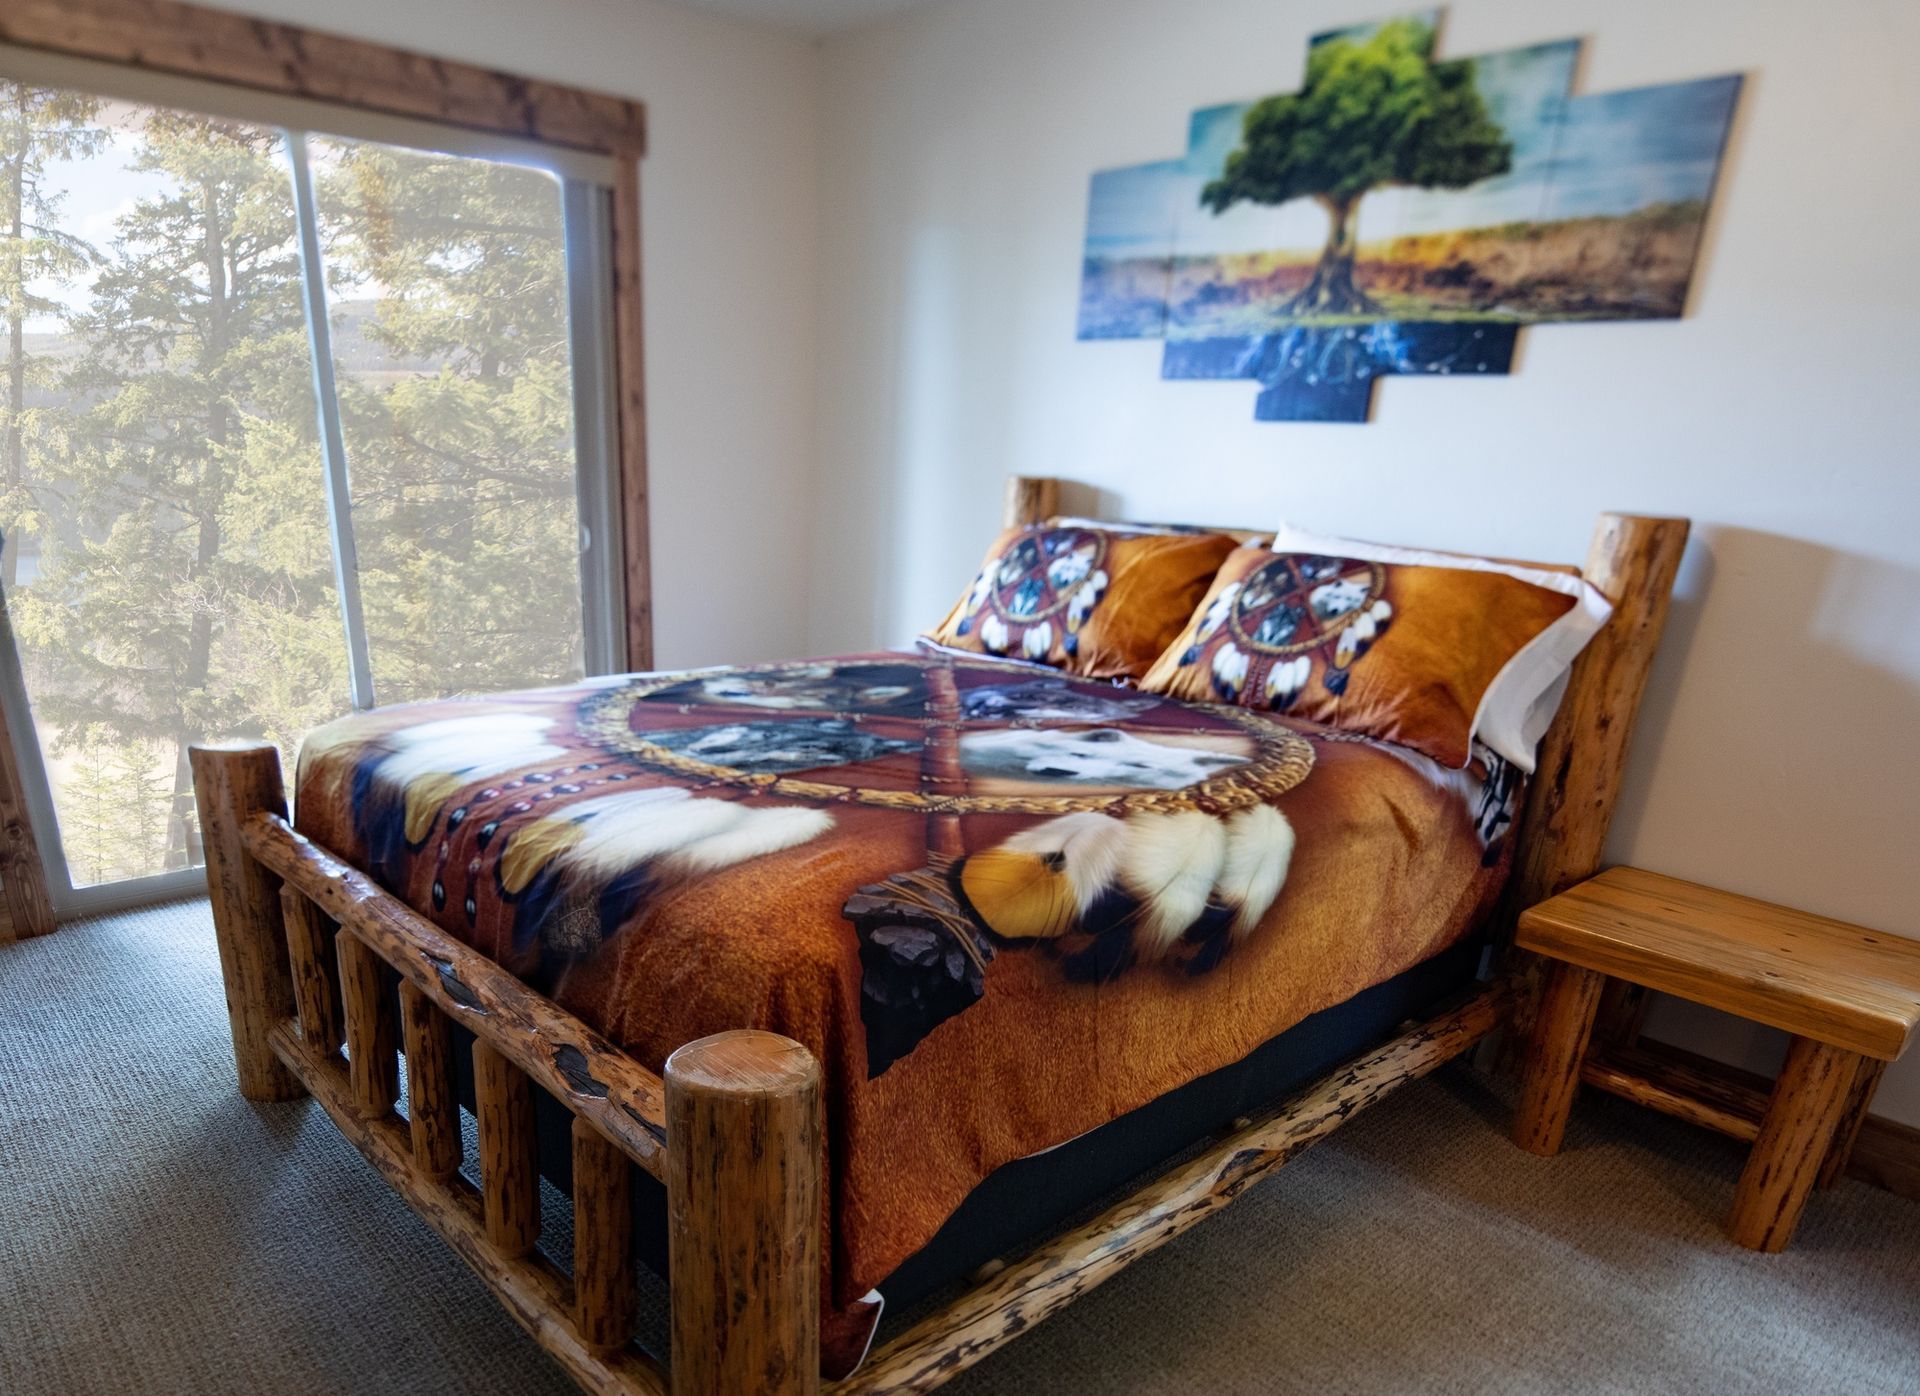 A bedroom with a log bed and a painting on the wall above it.